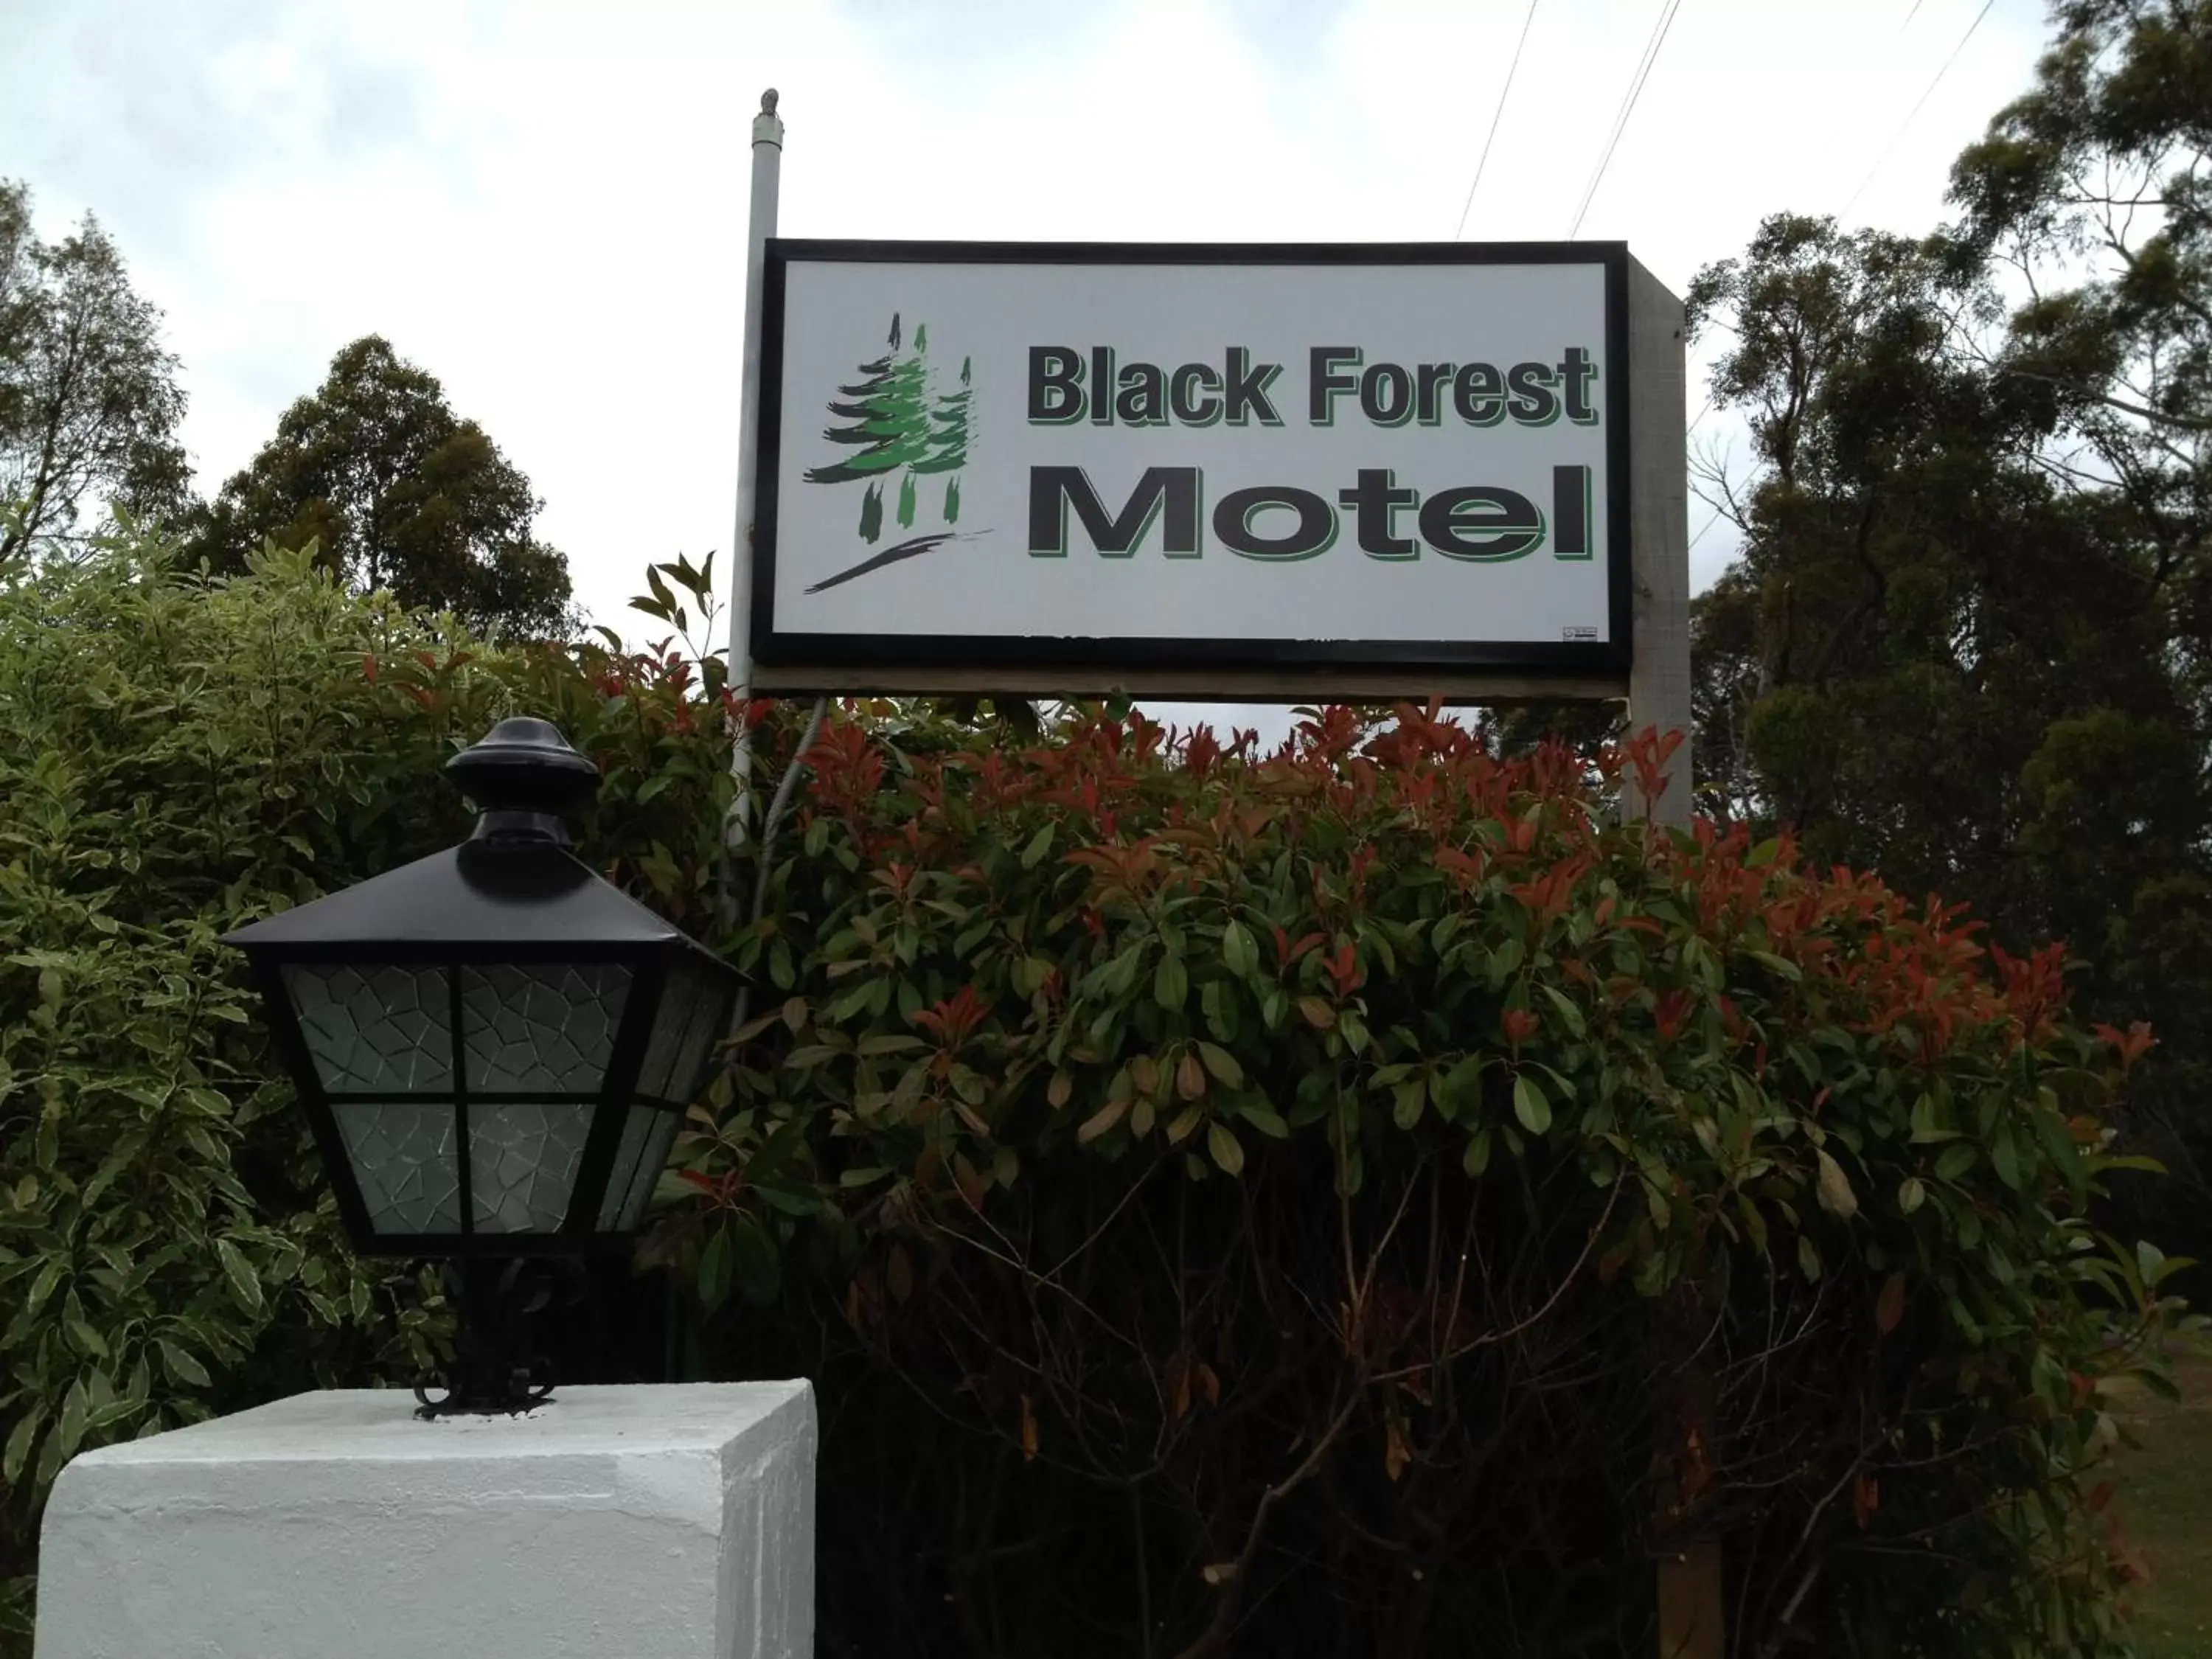 Day in Black Forest Motel